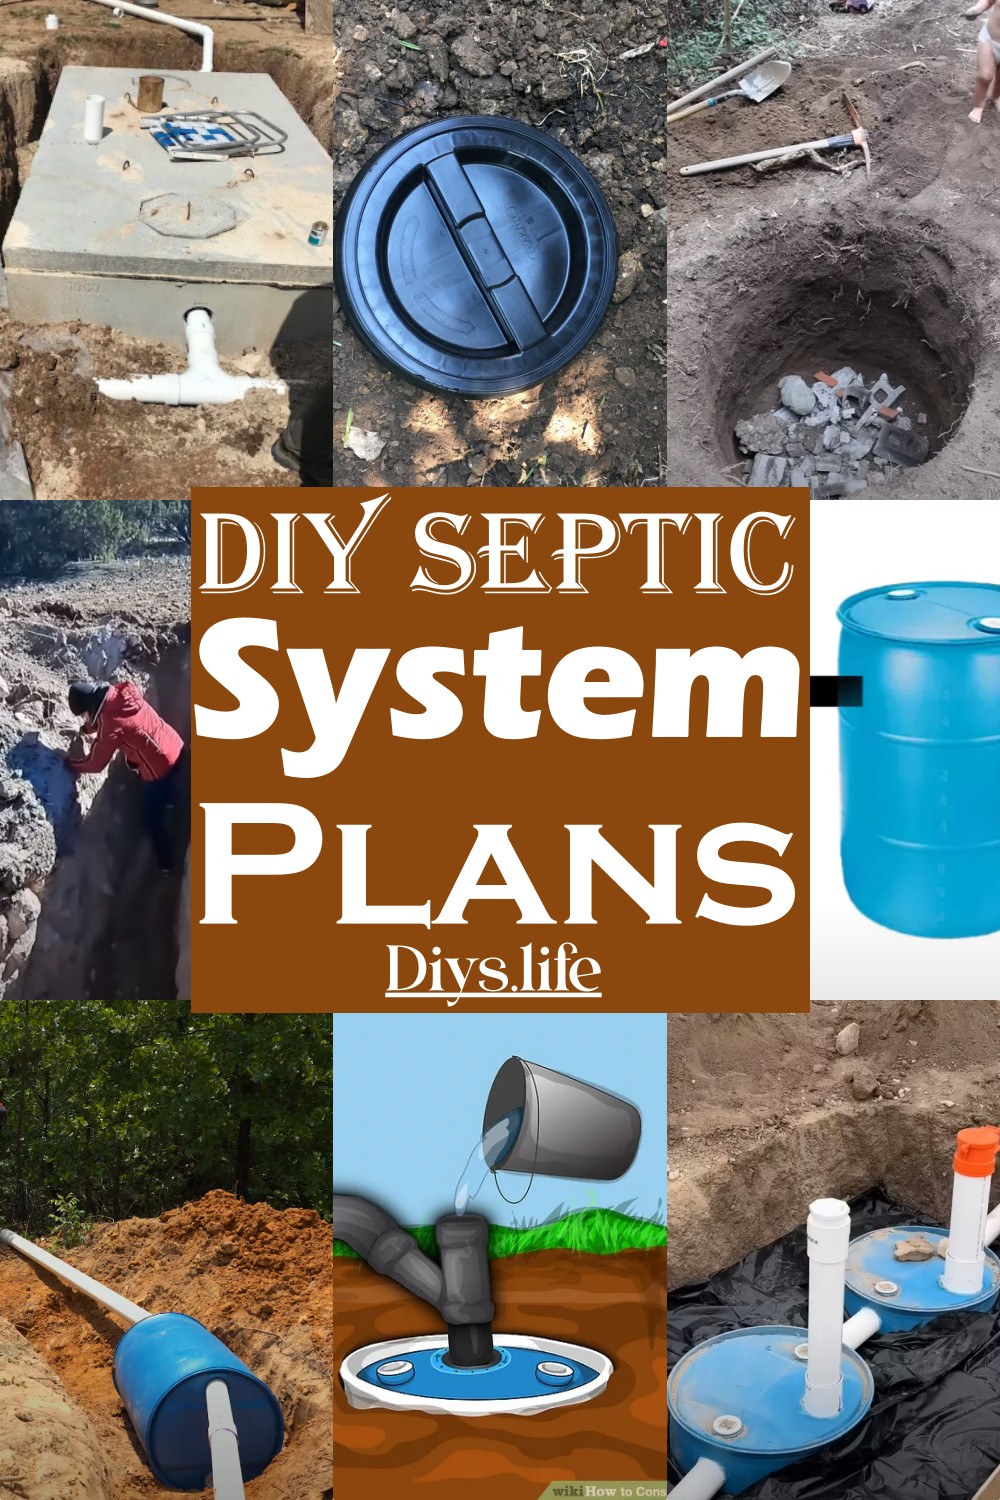 DIY Septic System Plans for Everyone